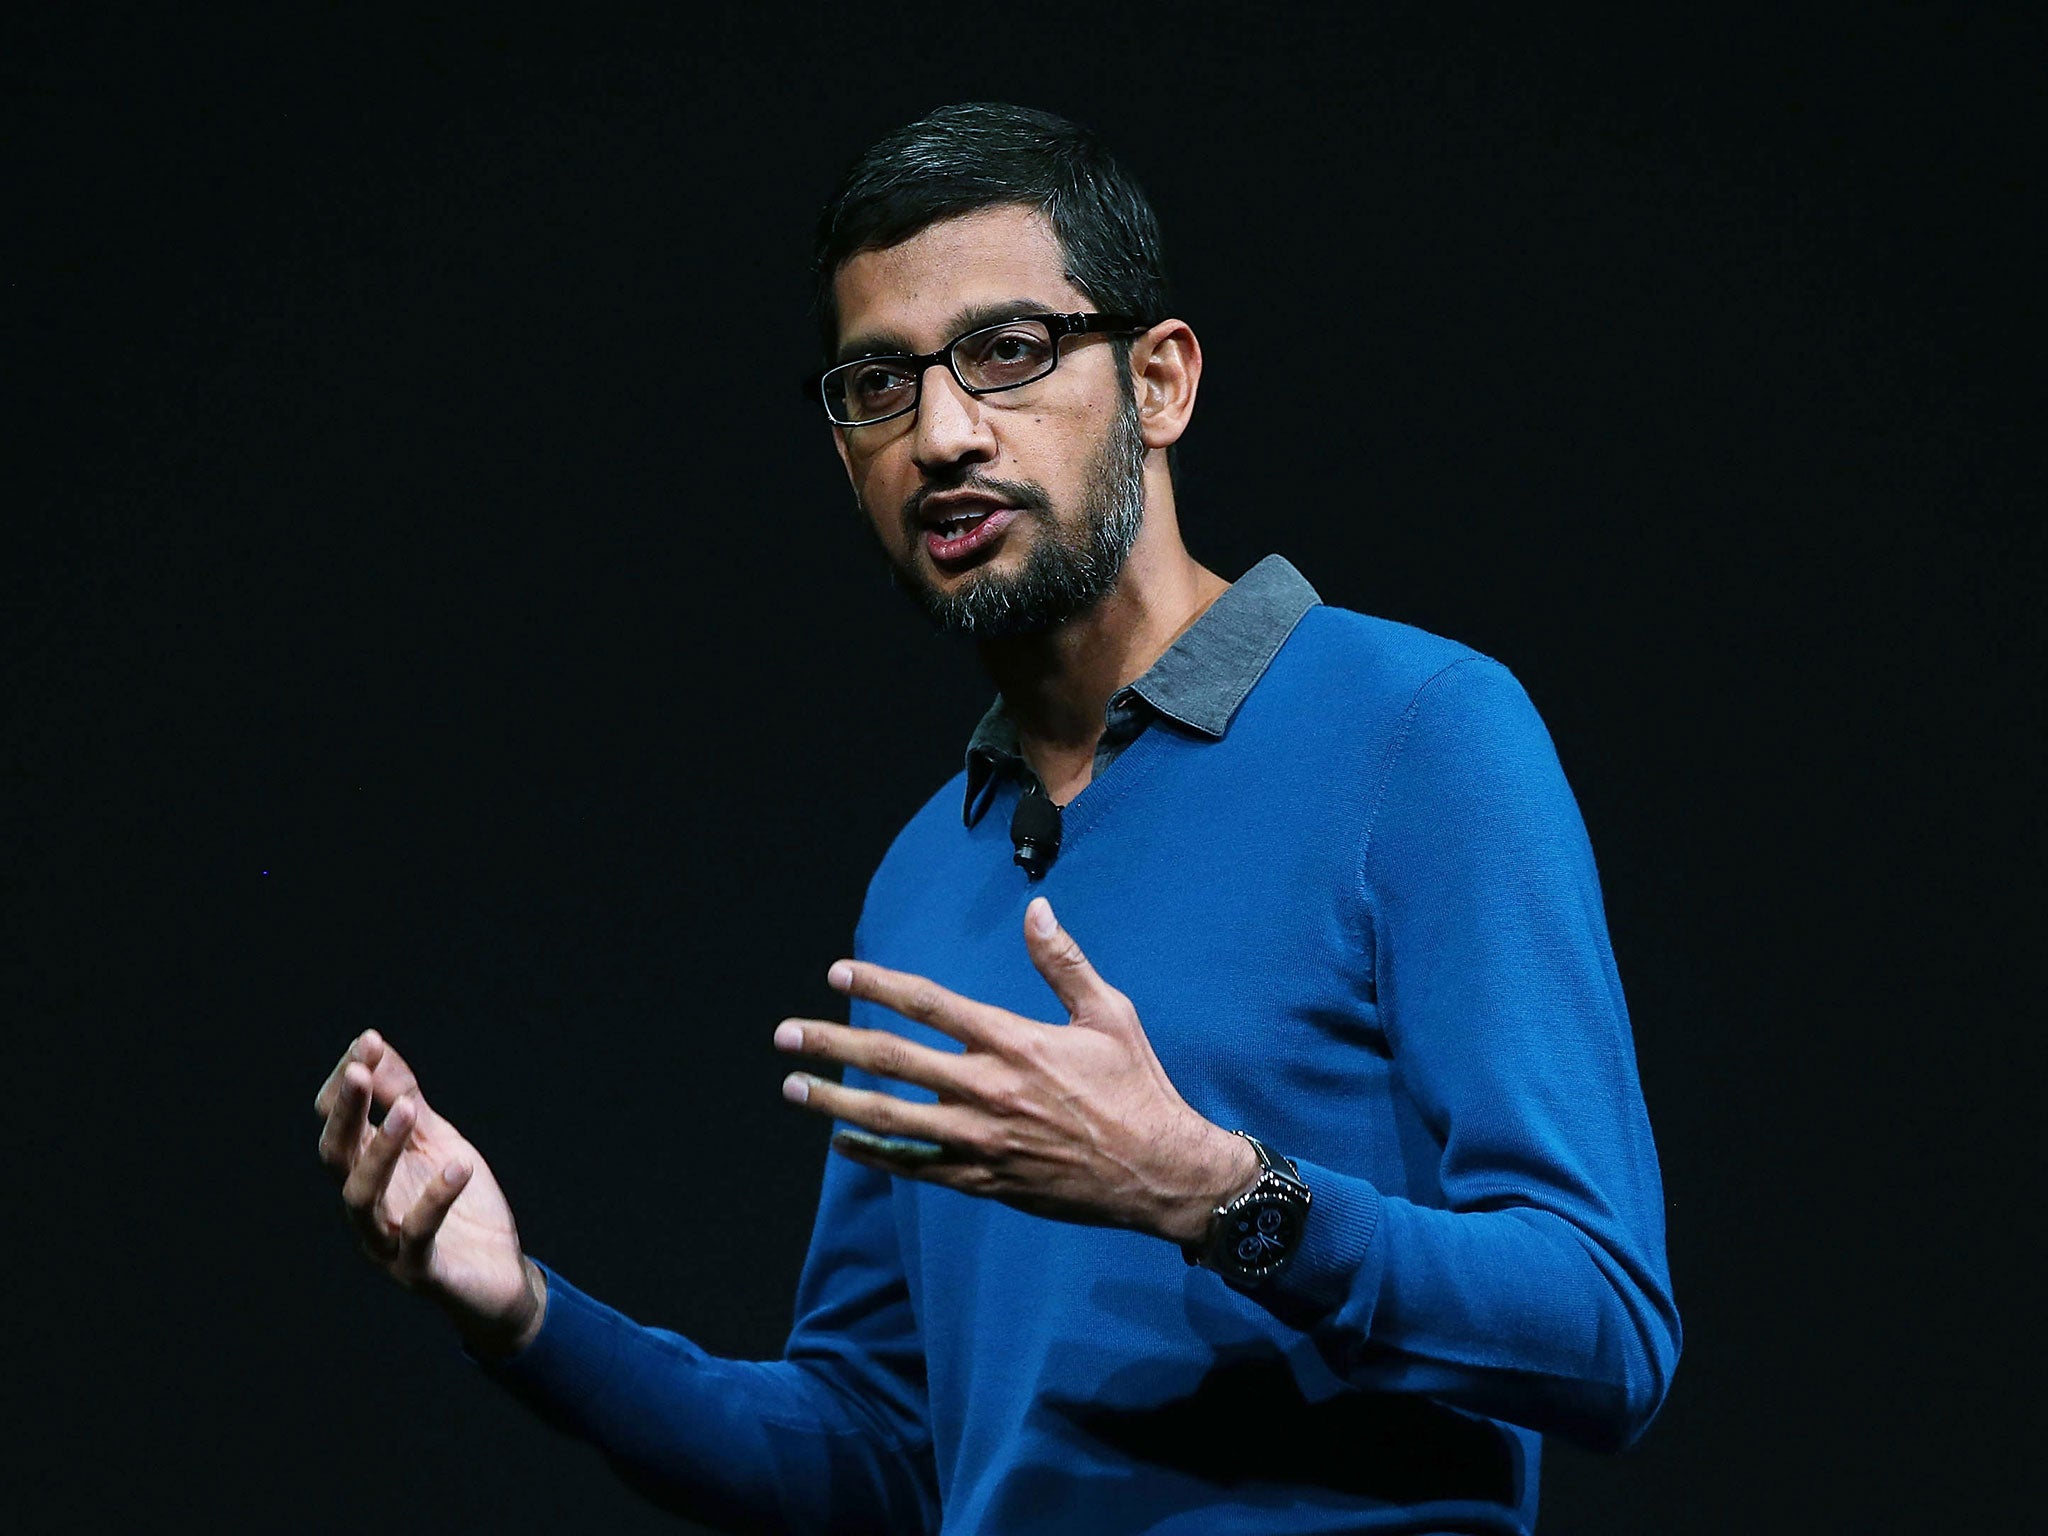 Google senior vice president of product Sundar Pichai delivers the keynote address during the 2015 Google I/O conference